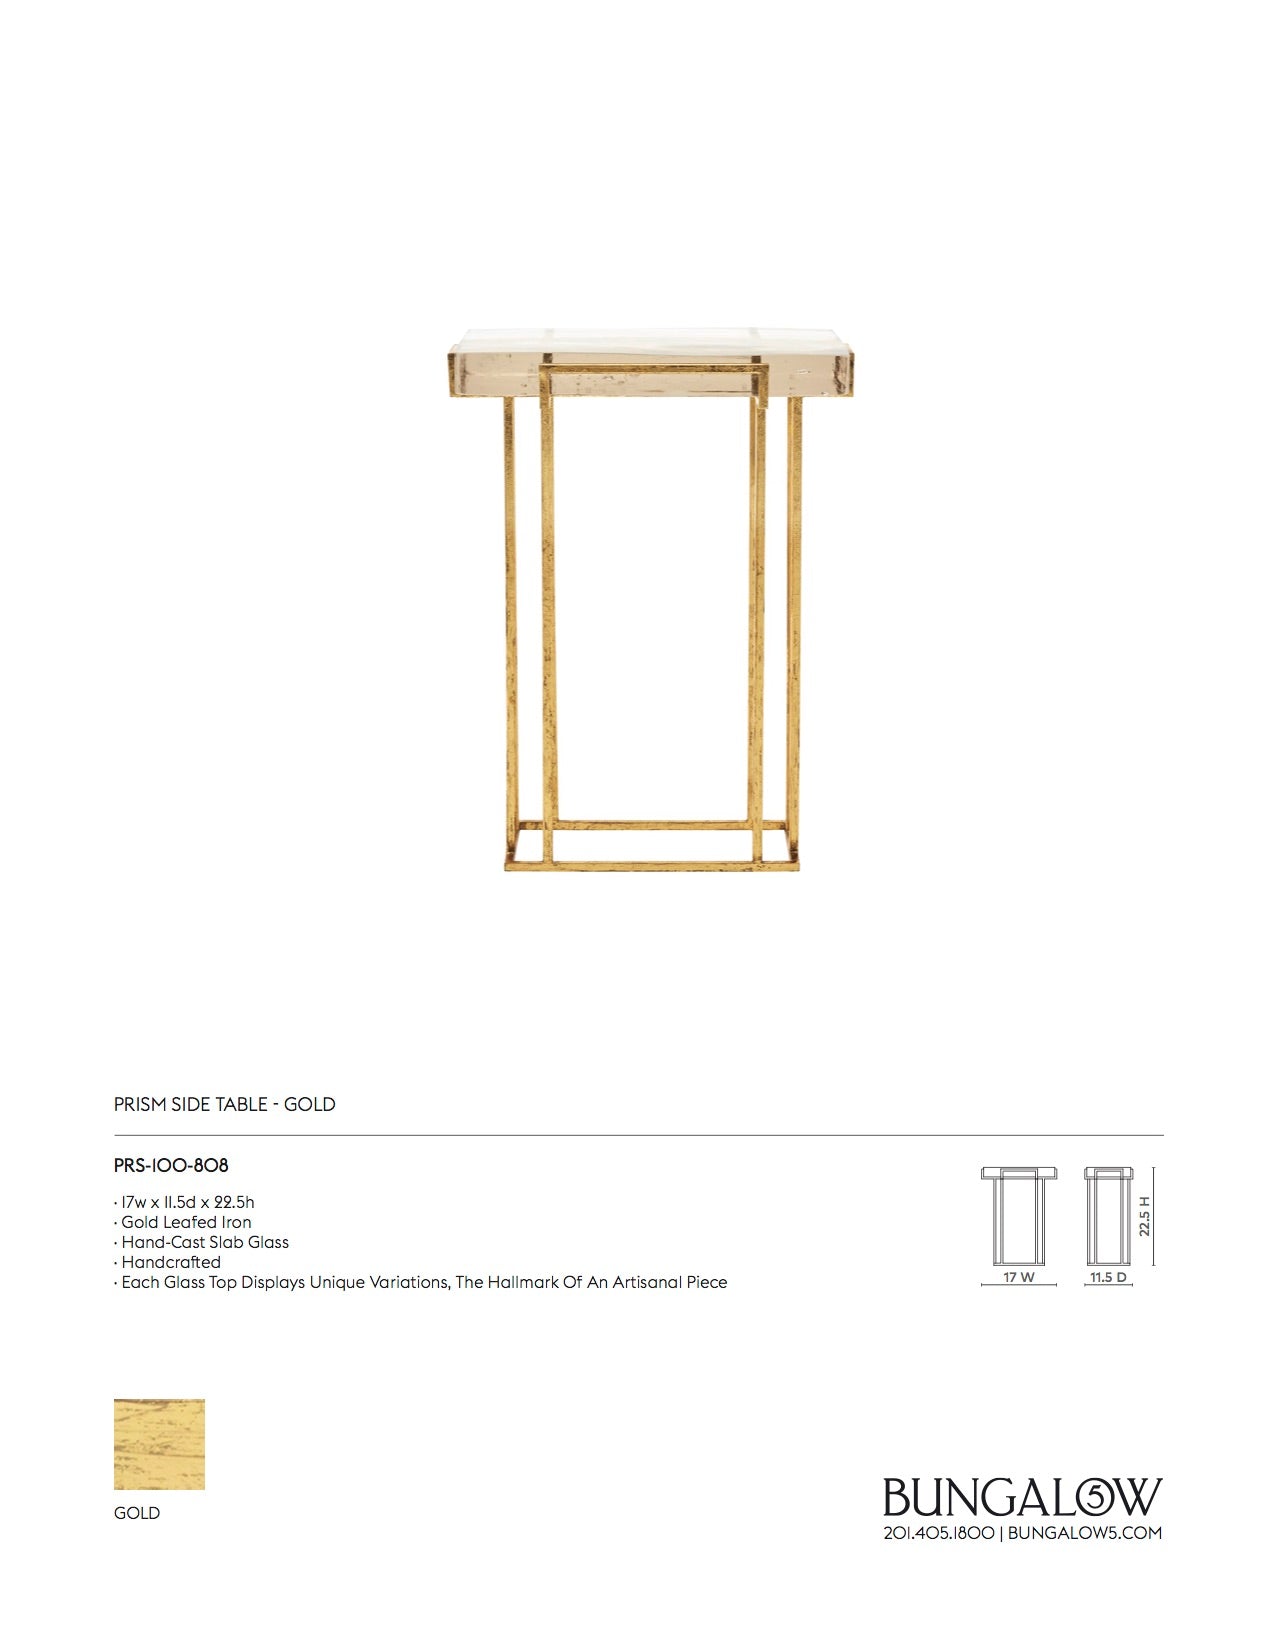 Bungalow 5 Prism Side Table Gold Tearsheet